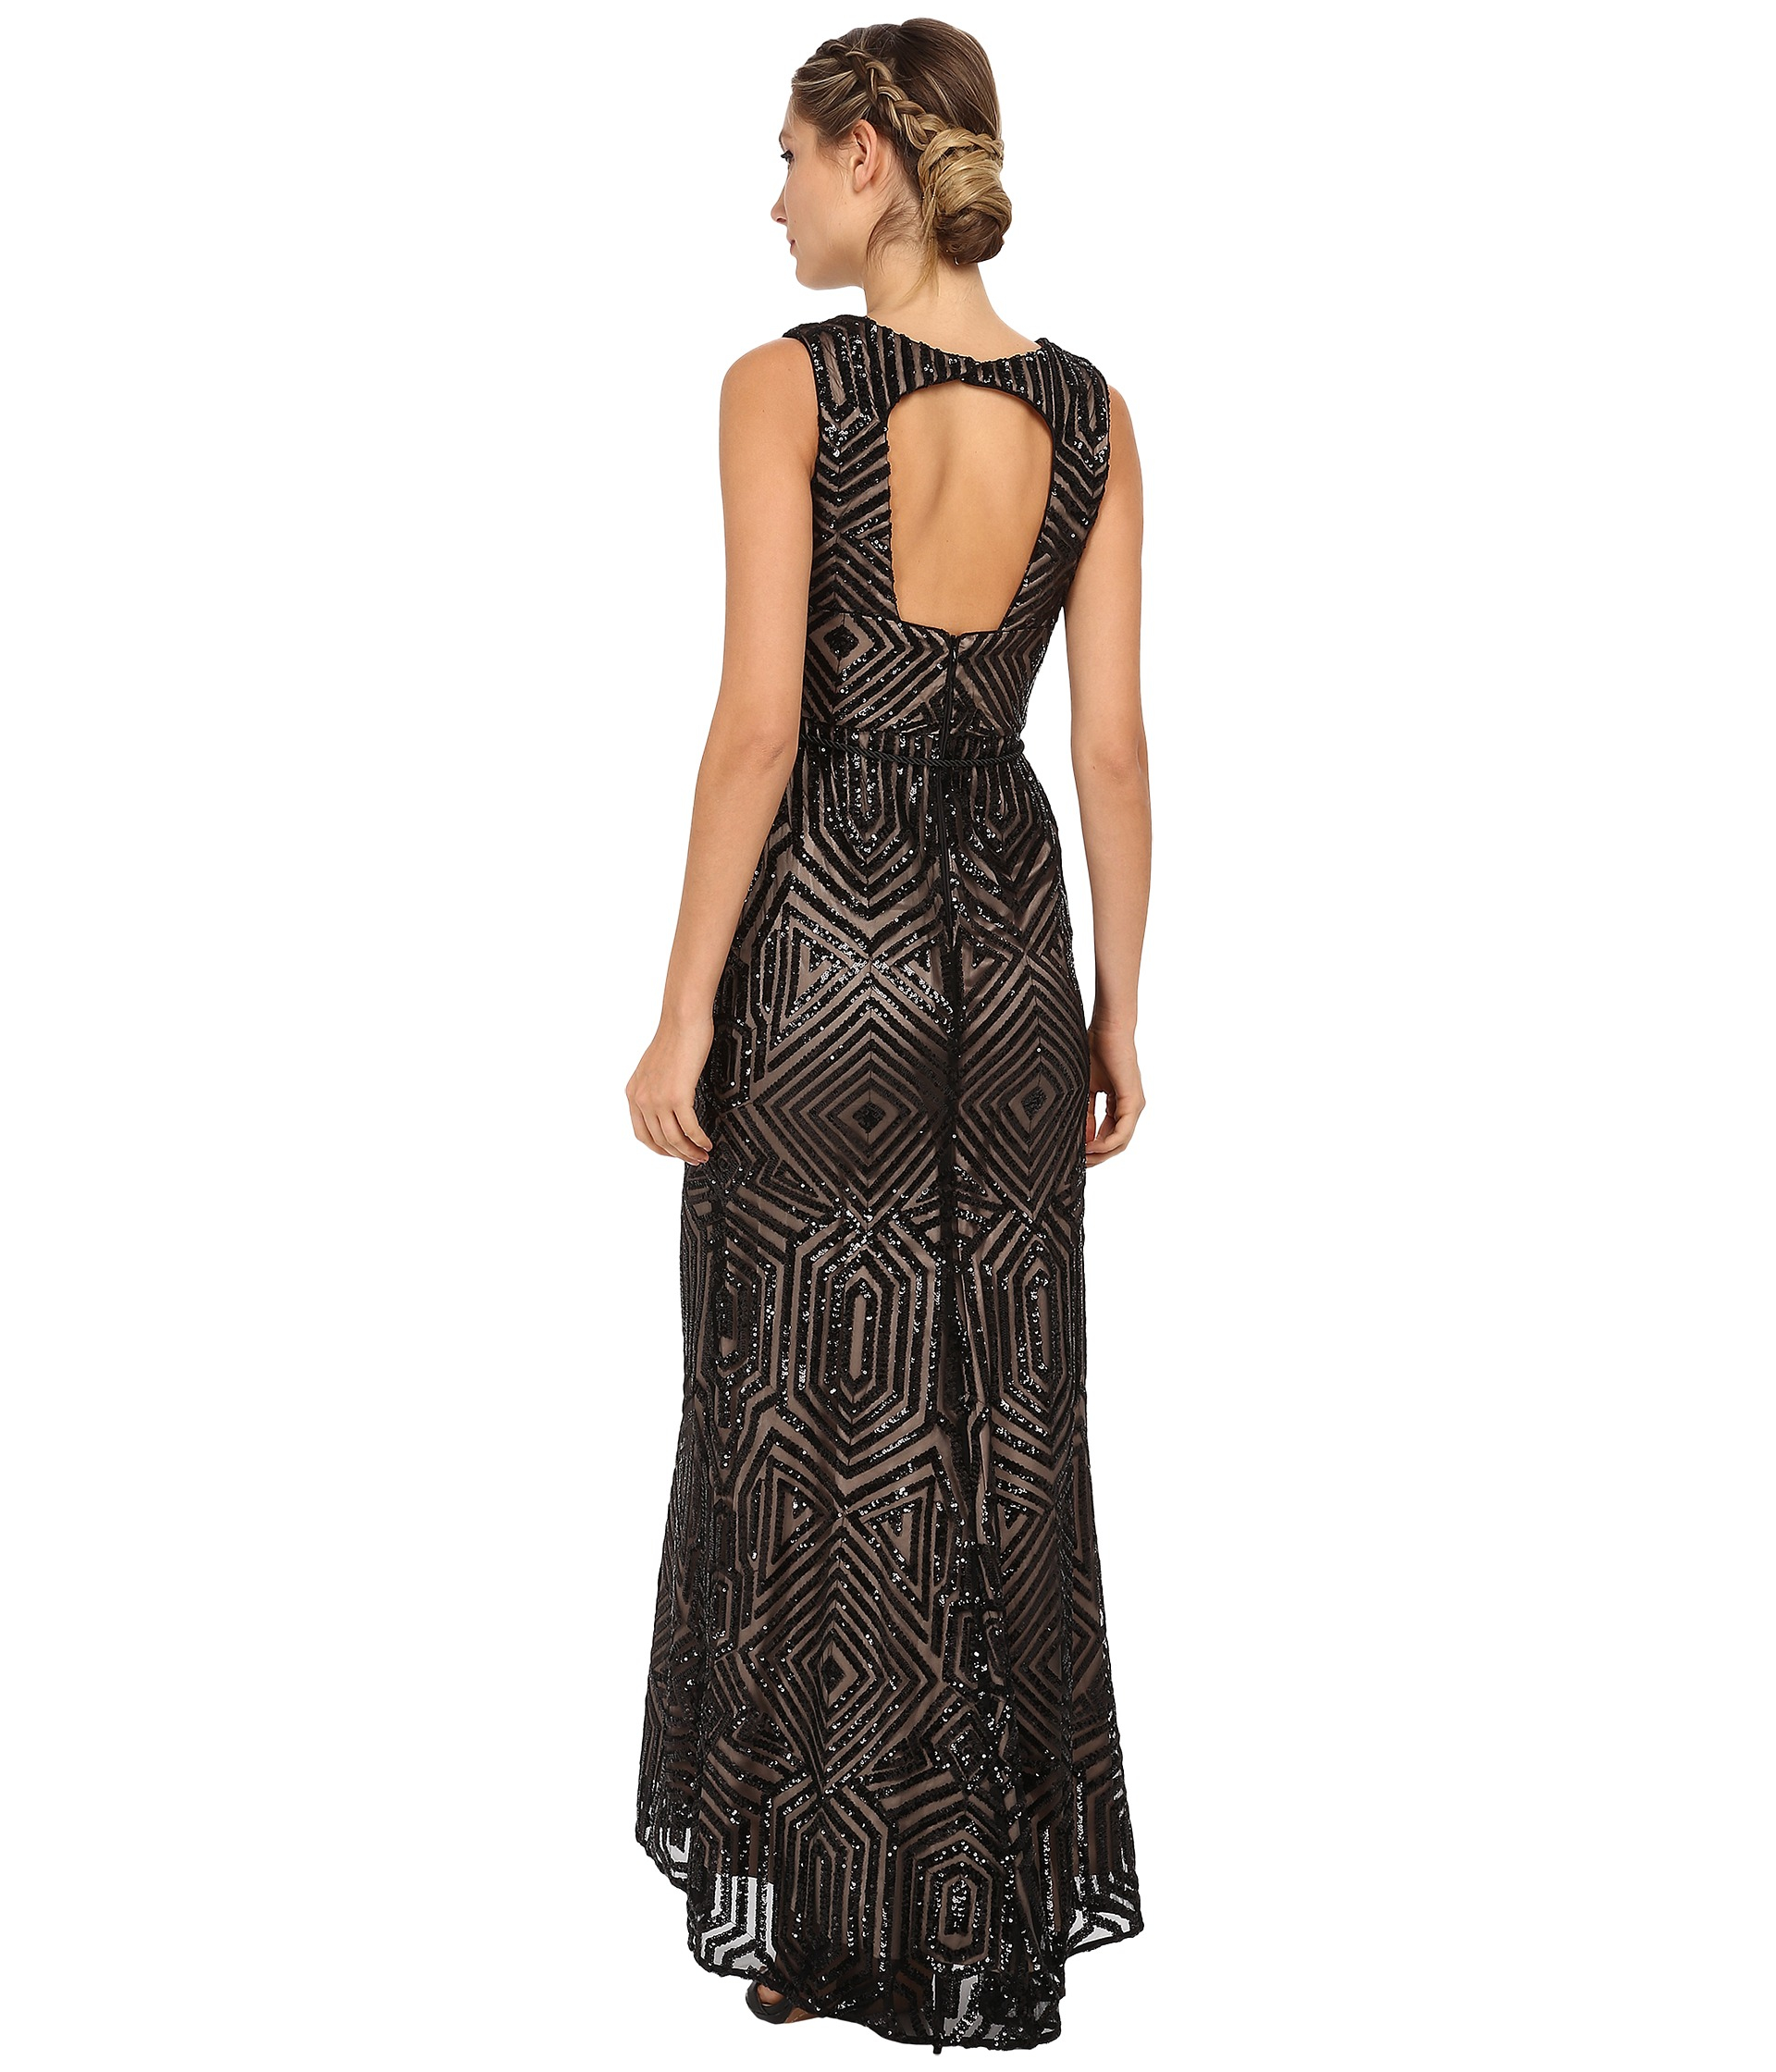 vince camuto black all over geometric sequin gown w fringe sash product 1 804863588 normal